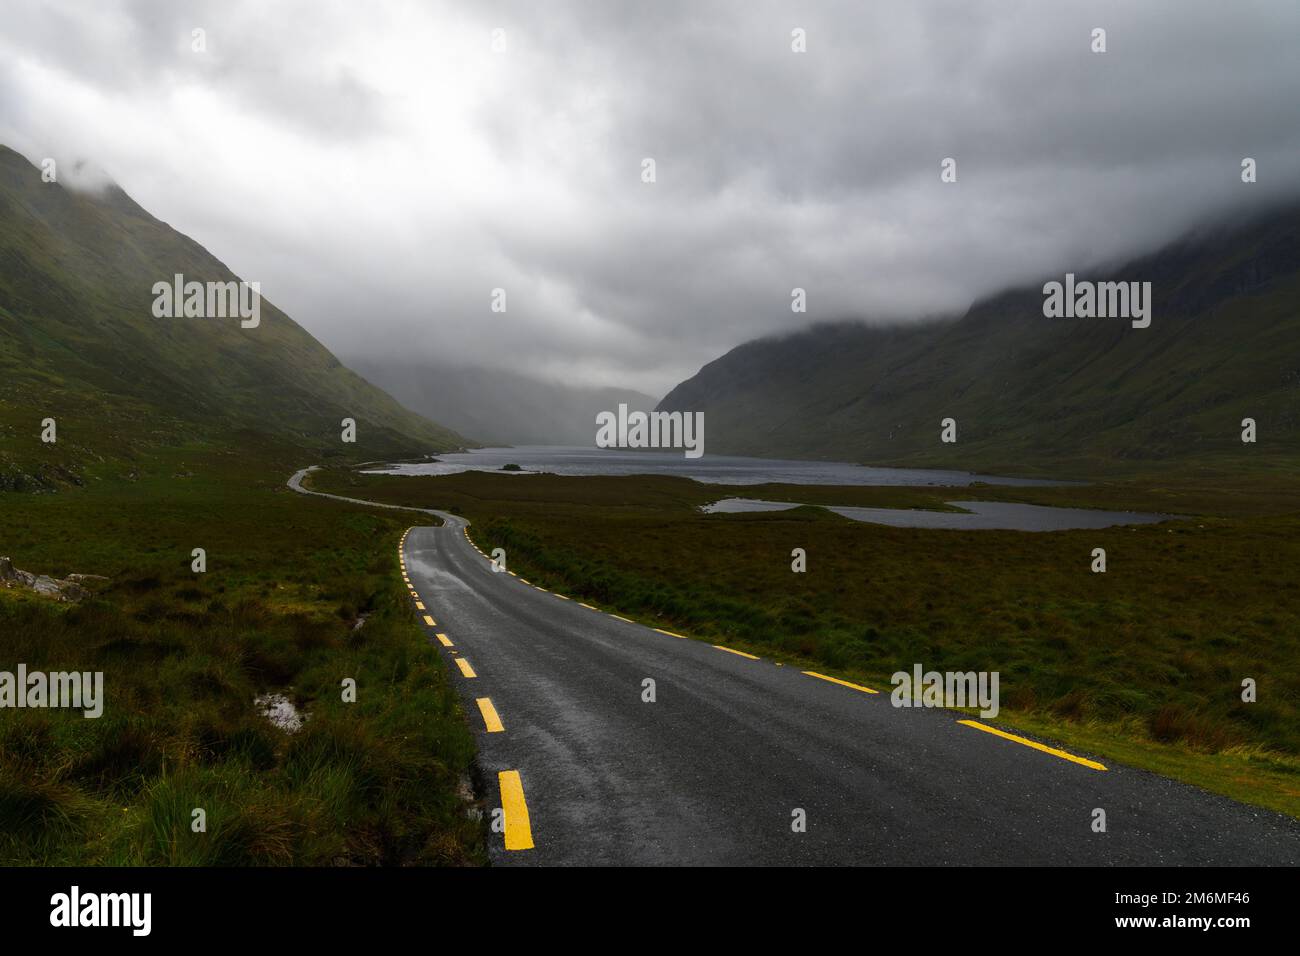 Narrow black-top highway with yellow road markings leads through an overcast mountain valley with fog and mist and lakes o nthe Stock Photo